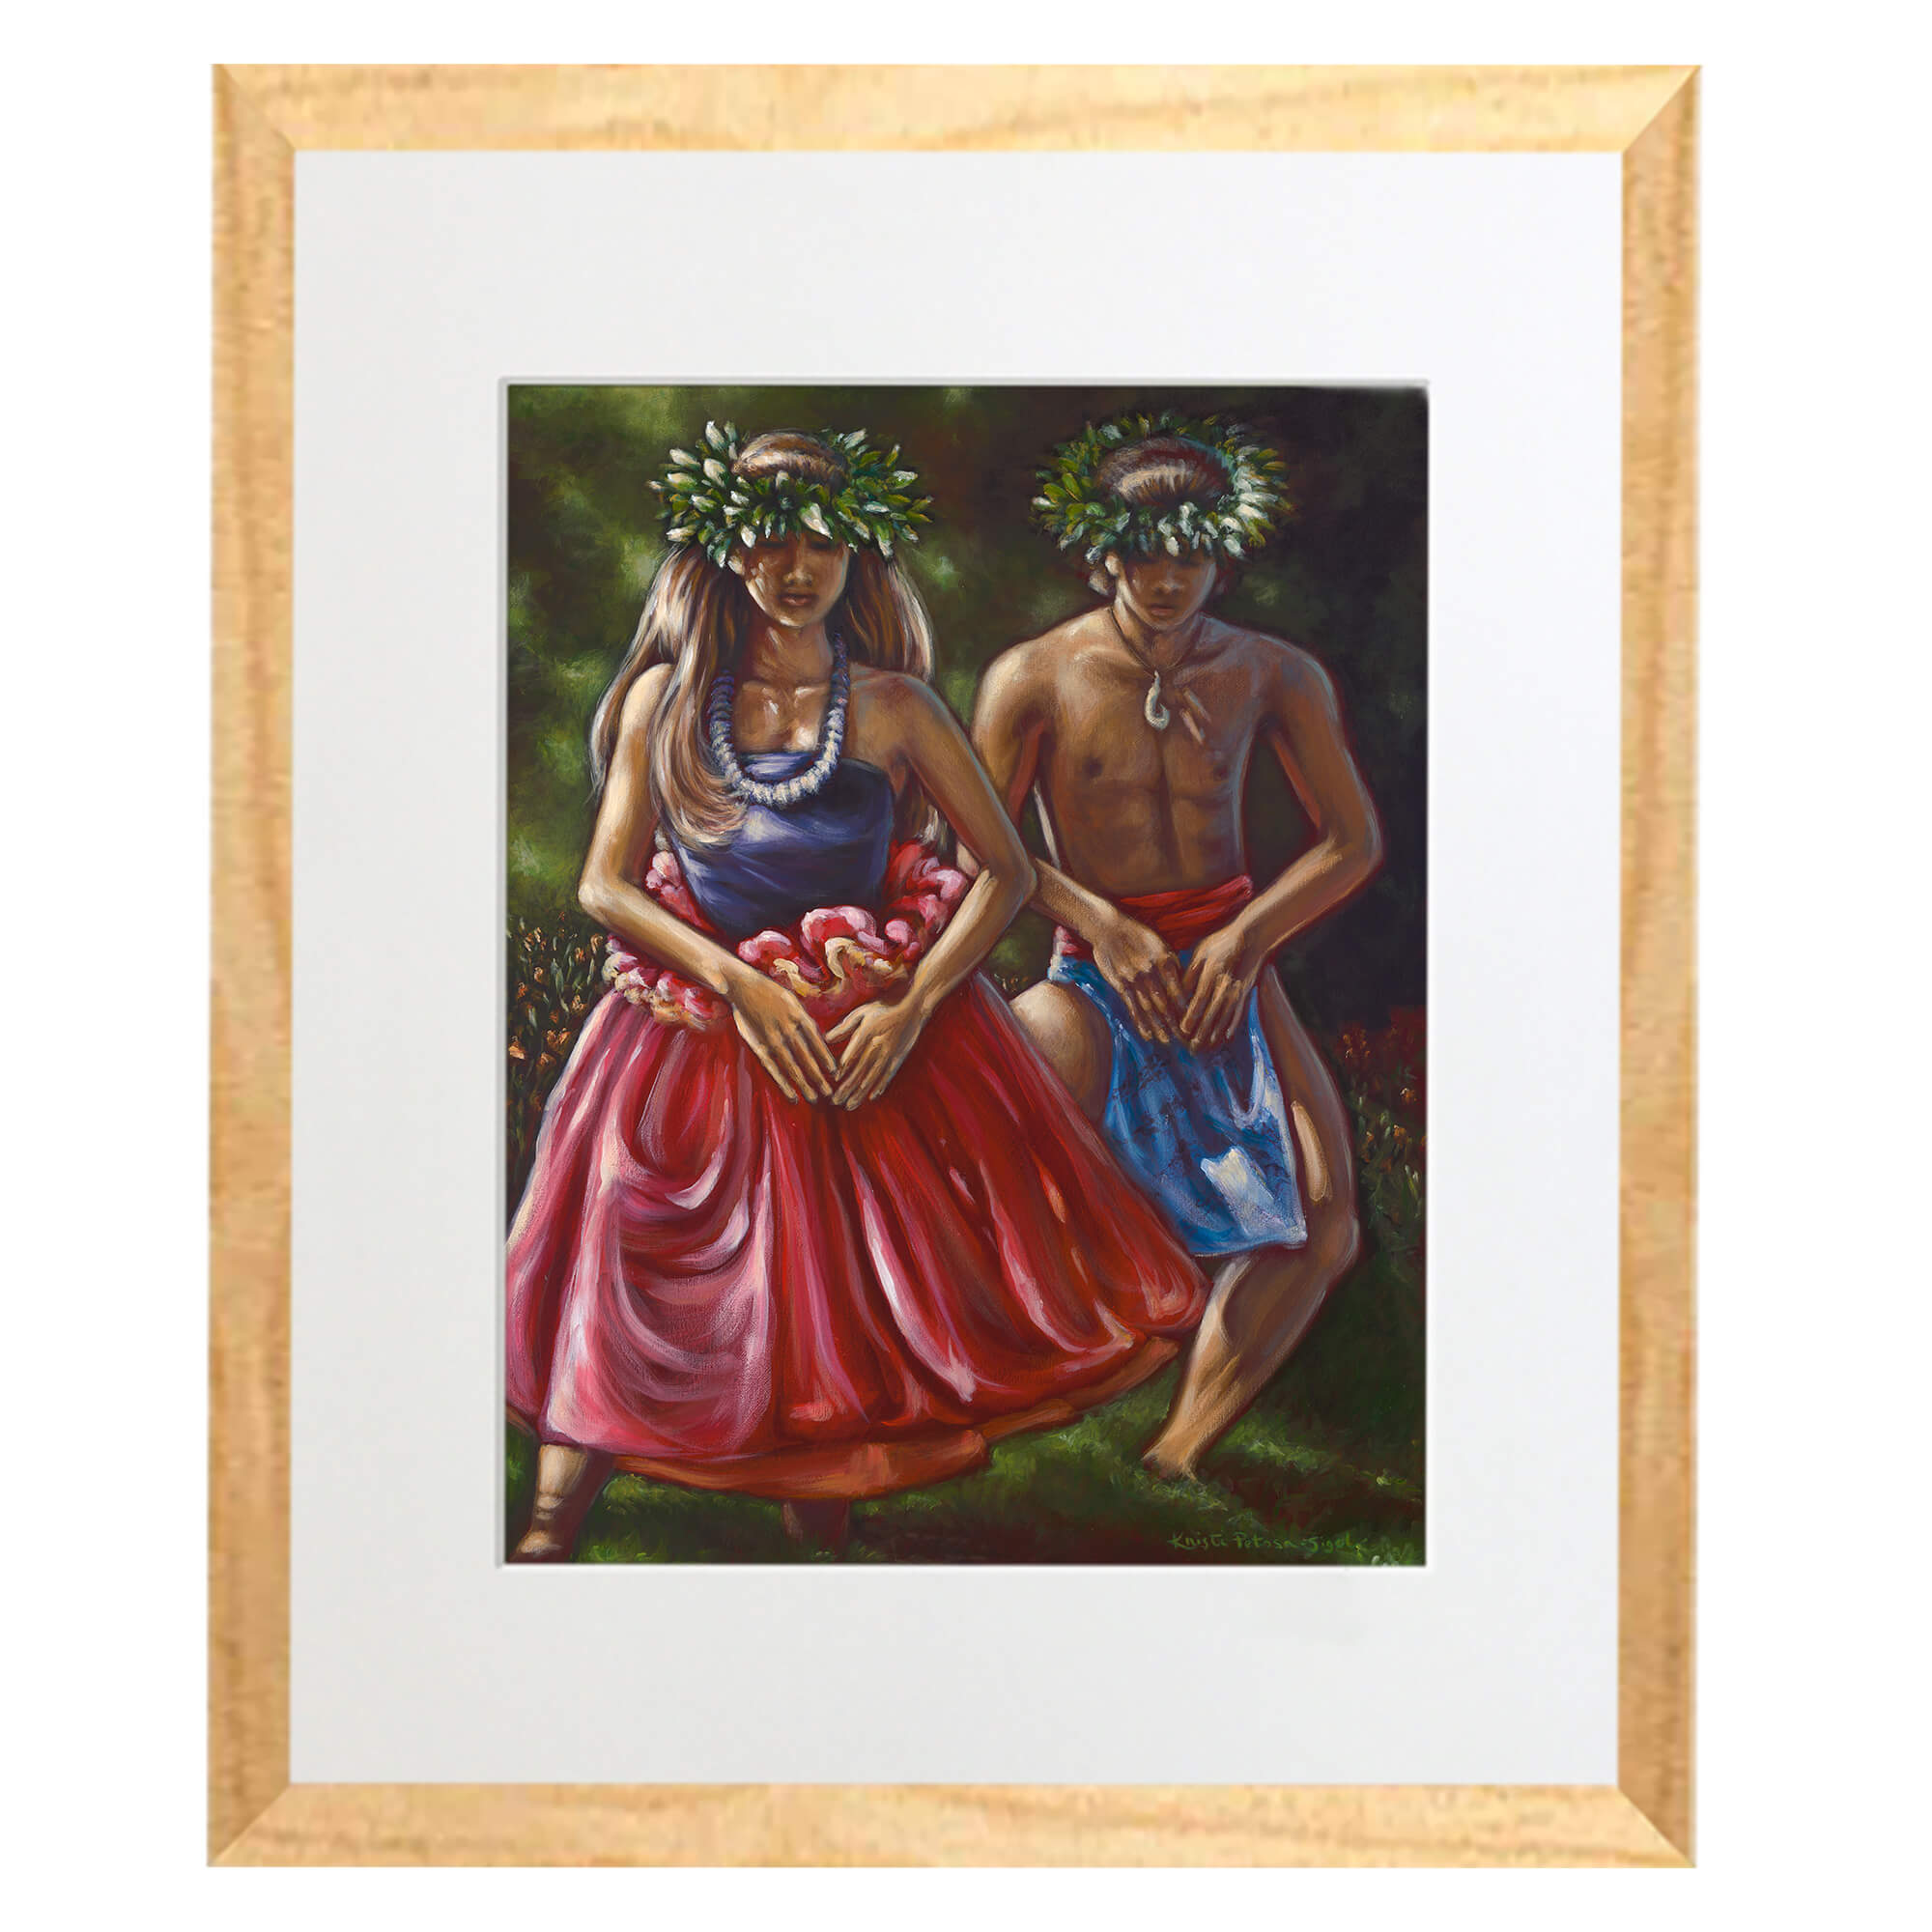 Matted art print with wood frame featuring a woman with brown hair  by hawaii artist Kristi Petosa